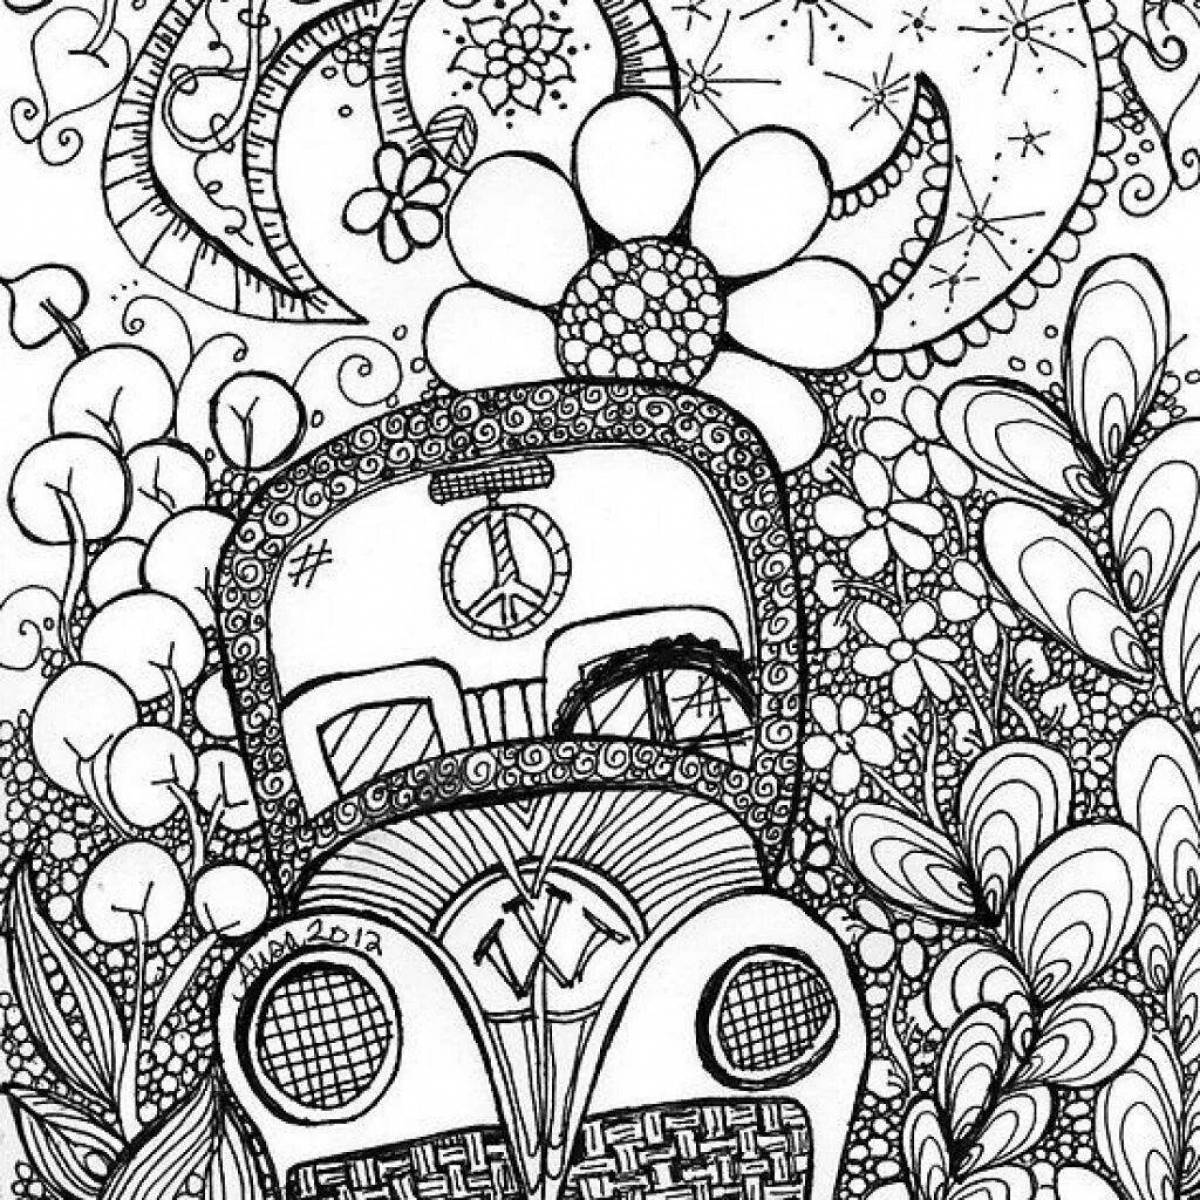 Relaxation coloring book relaxation for children